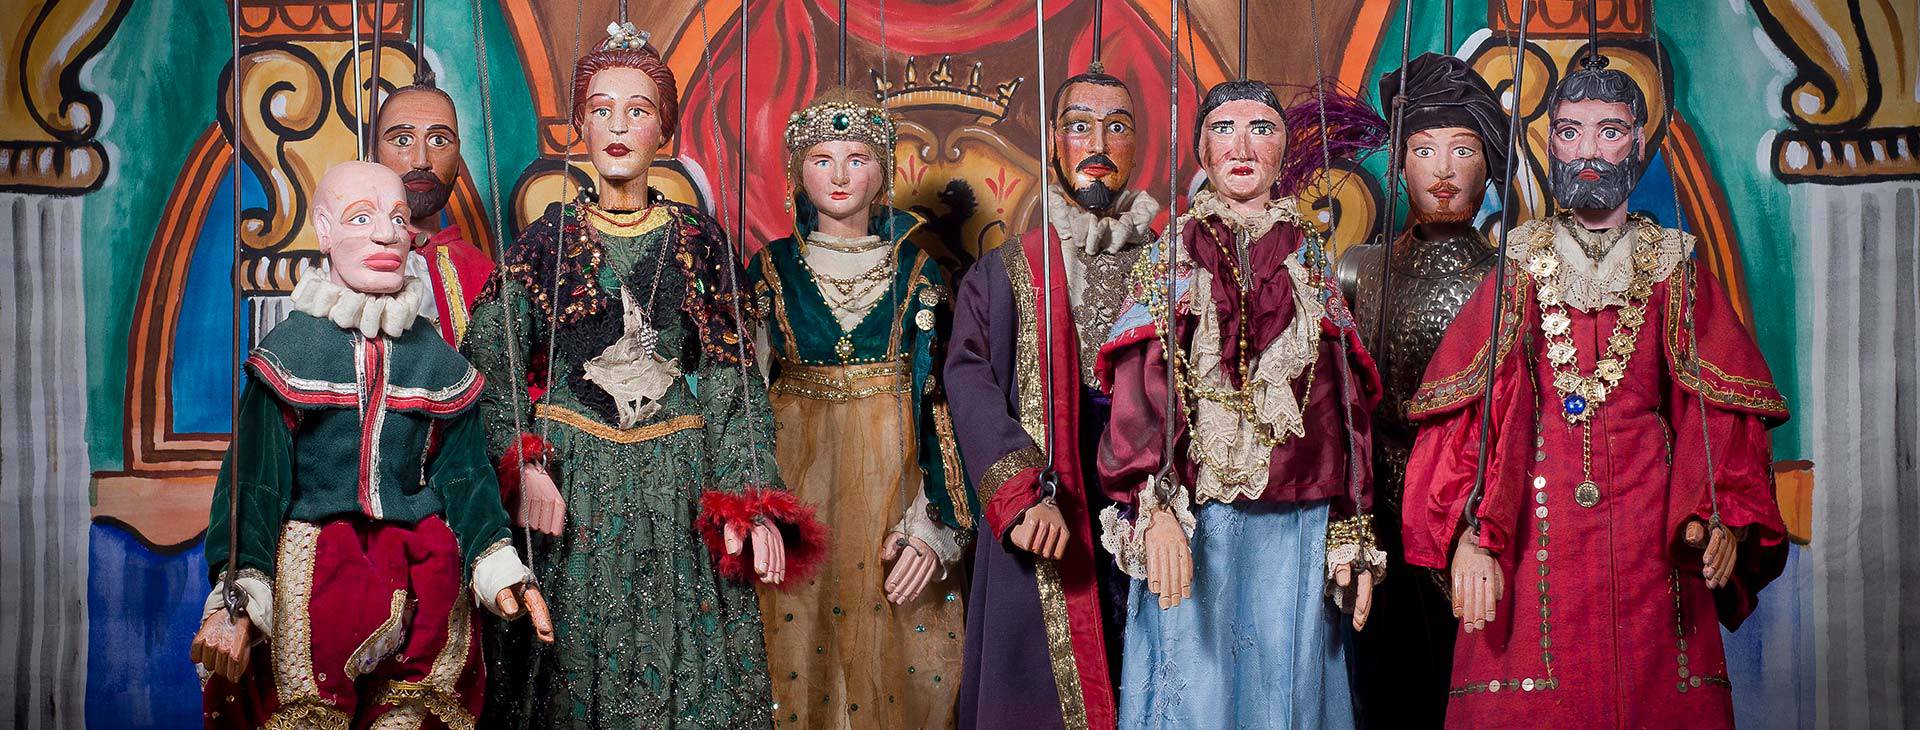 The Sicilian puppet theatre is one of Sicily's greatest traditional art forms, the cultural importance of this art form was recognized by Unesco in 2001.